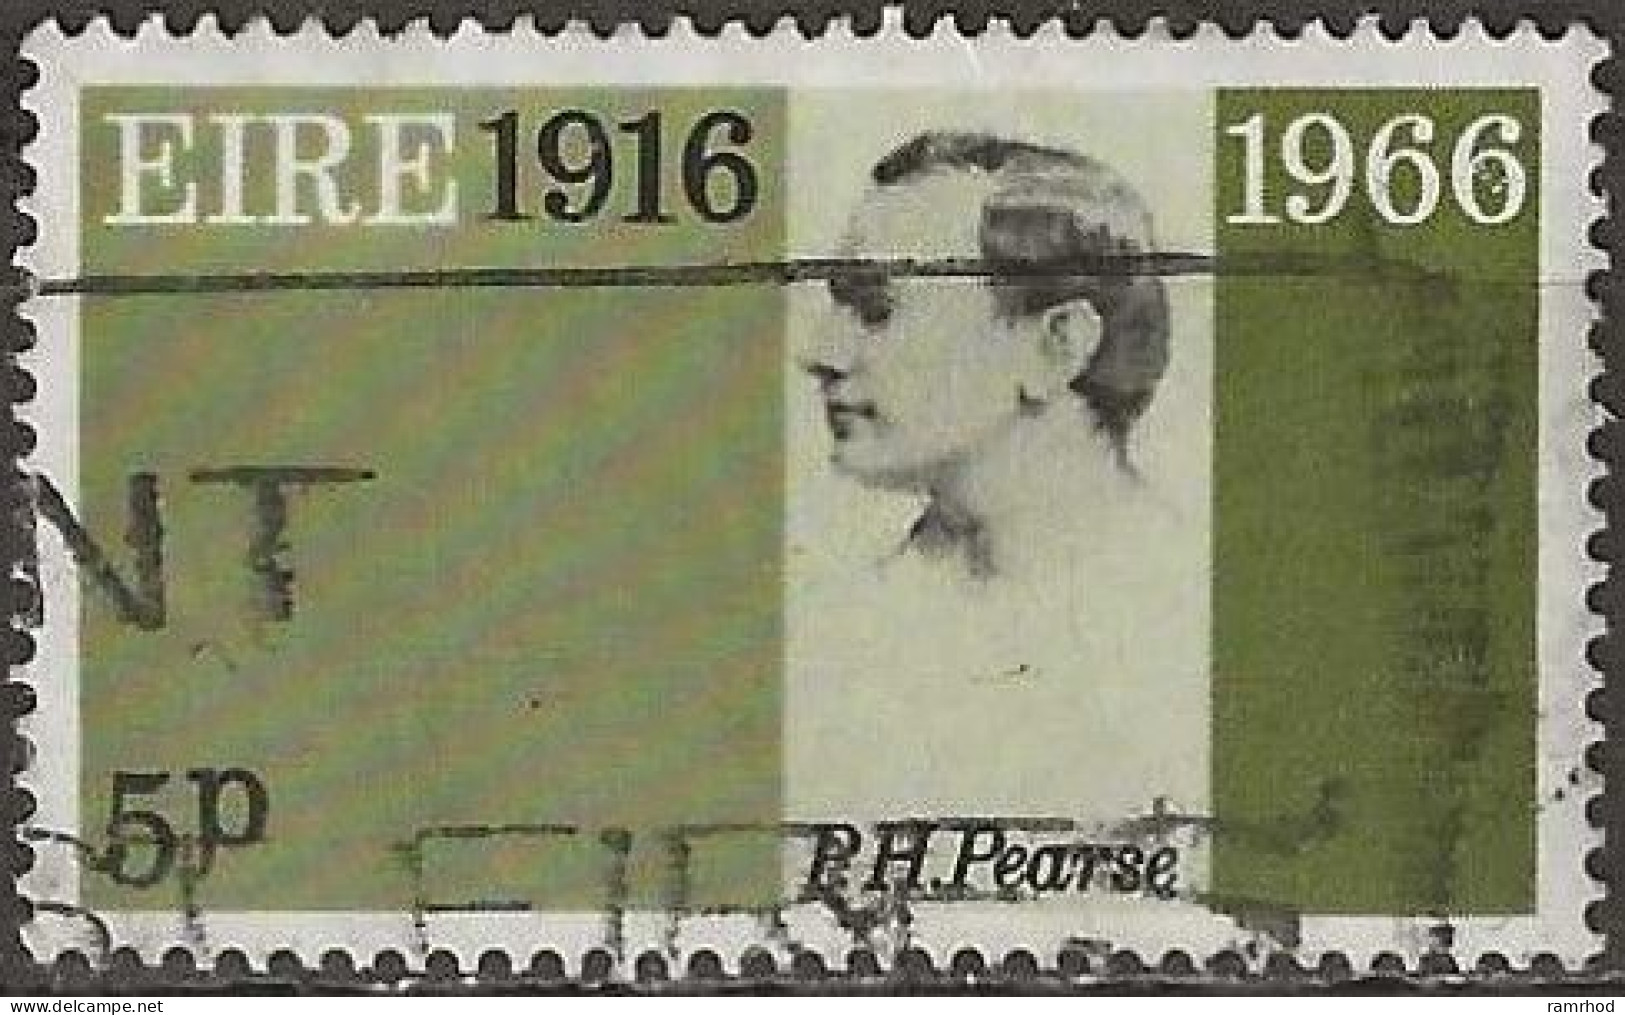 IRELAND 1966 50th Anniversary Of Easter Rising - 5d P. H. Pearse FU - Usados